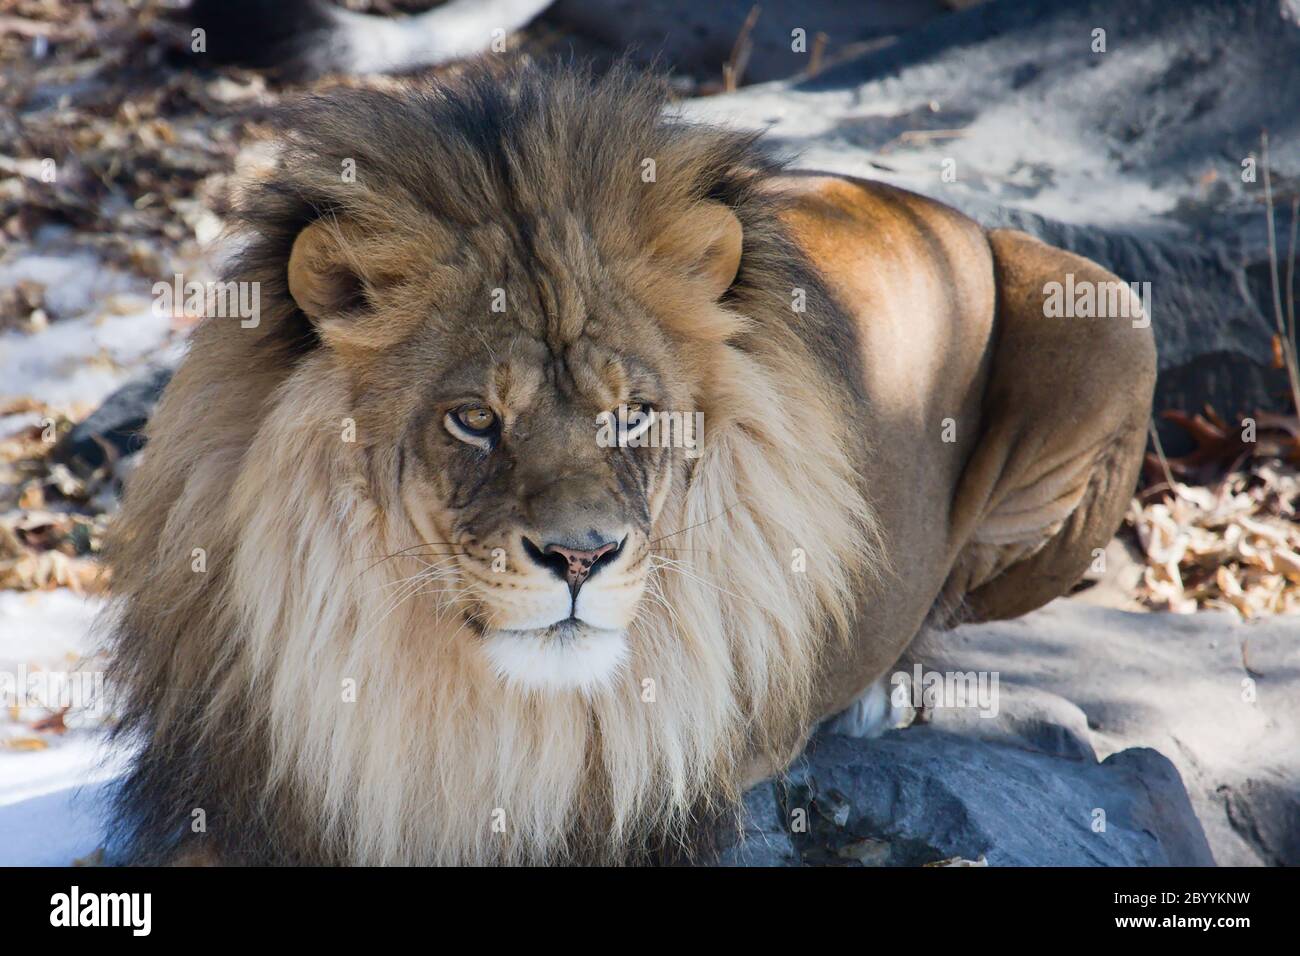 Lion Laying Down Stock Photo